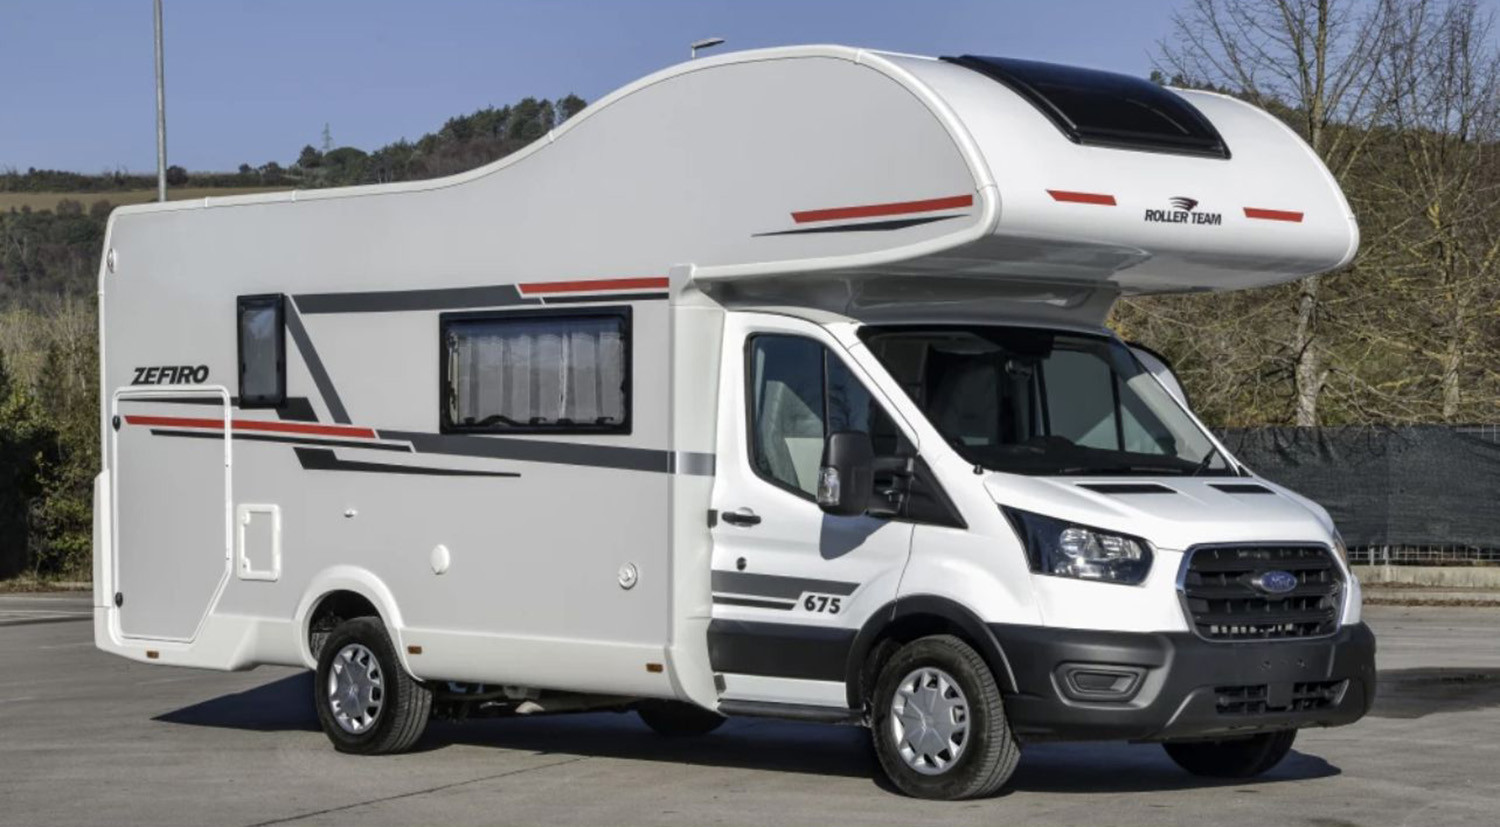 A Roller team Motorhome called Christine-Alice and for hire in Clacton, England